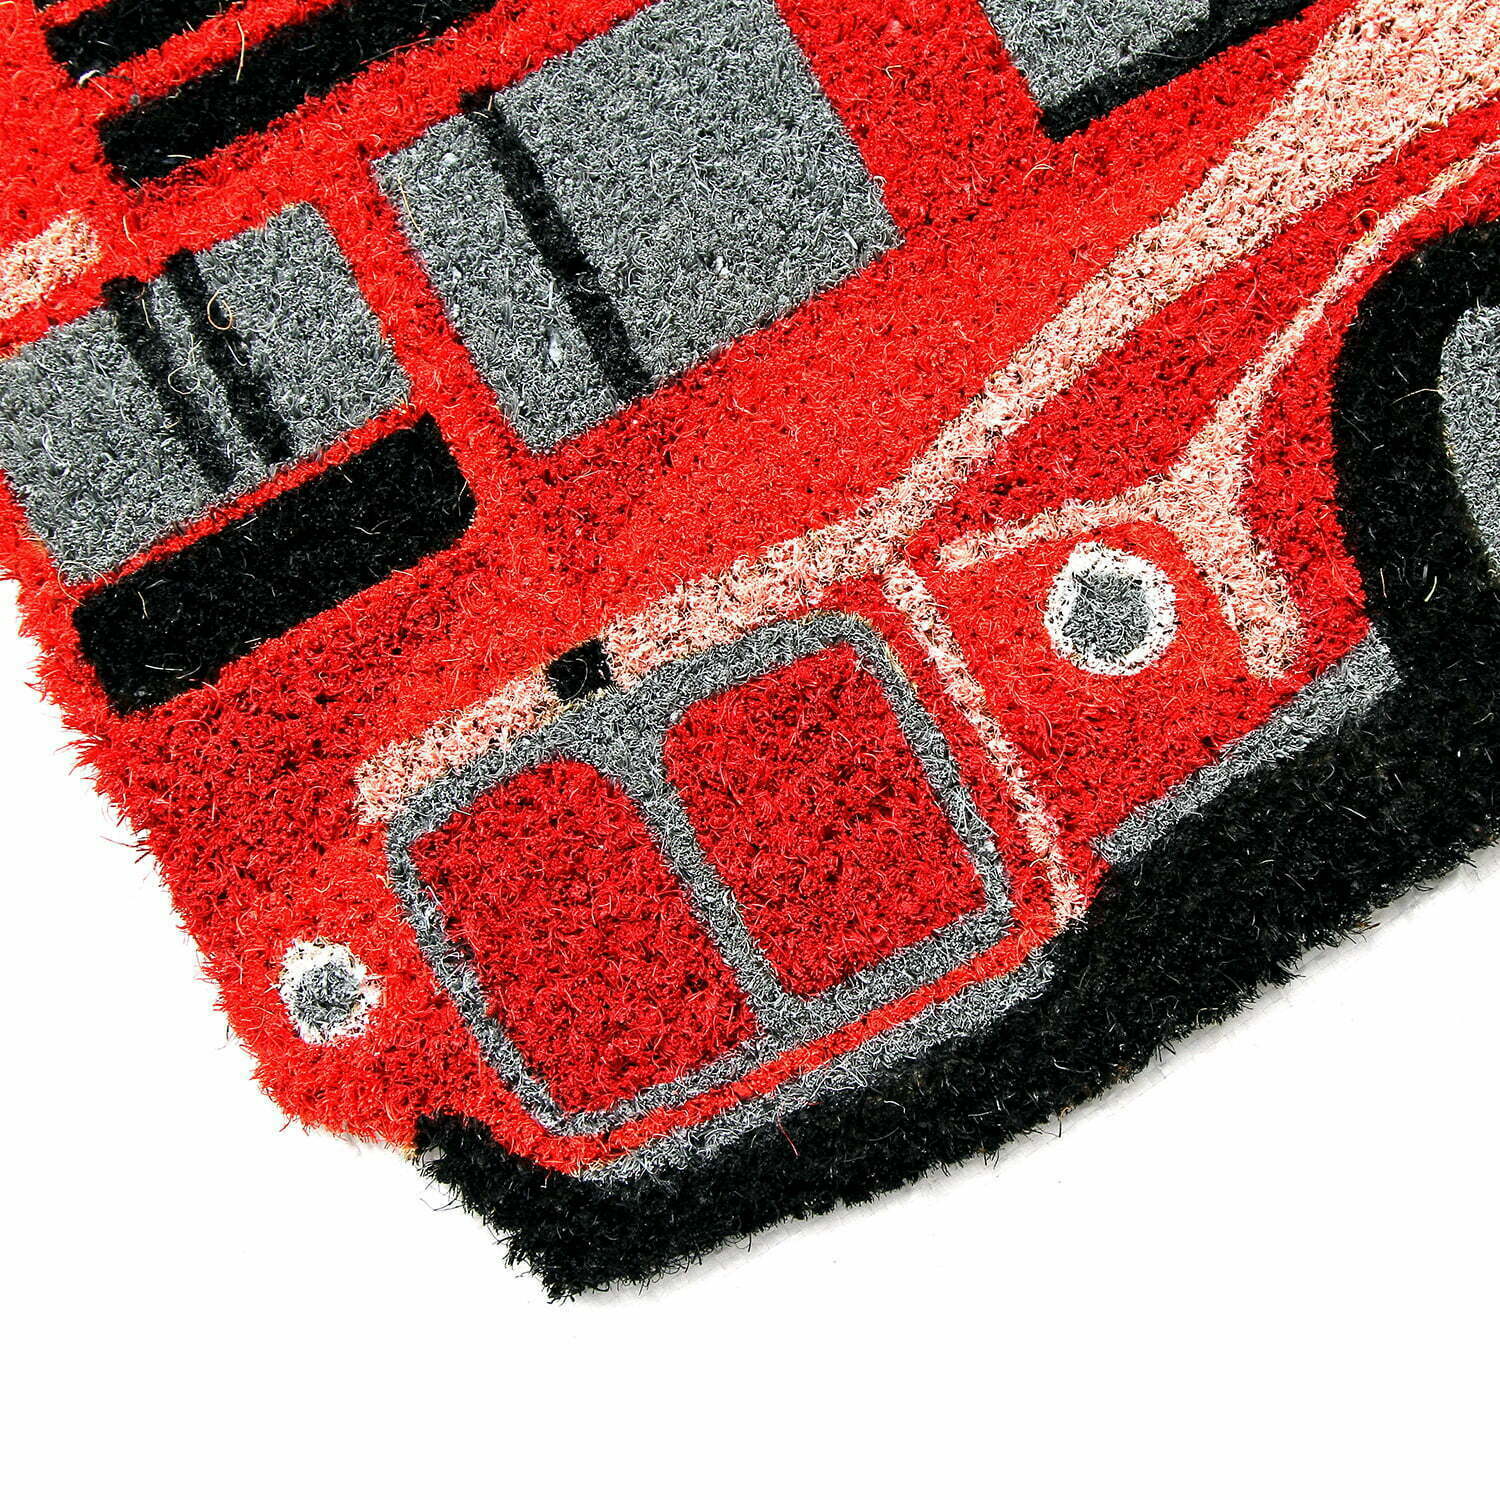 The Routemaster Bus Cutout Doormat Closeup Side View